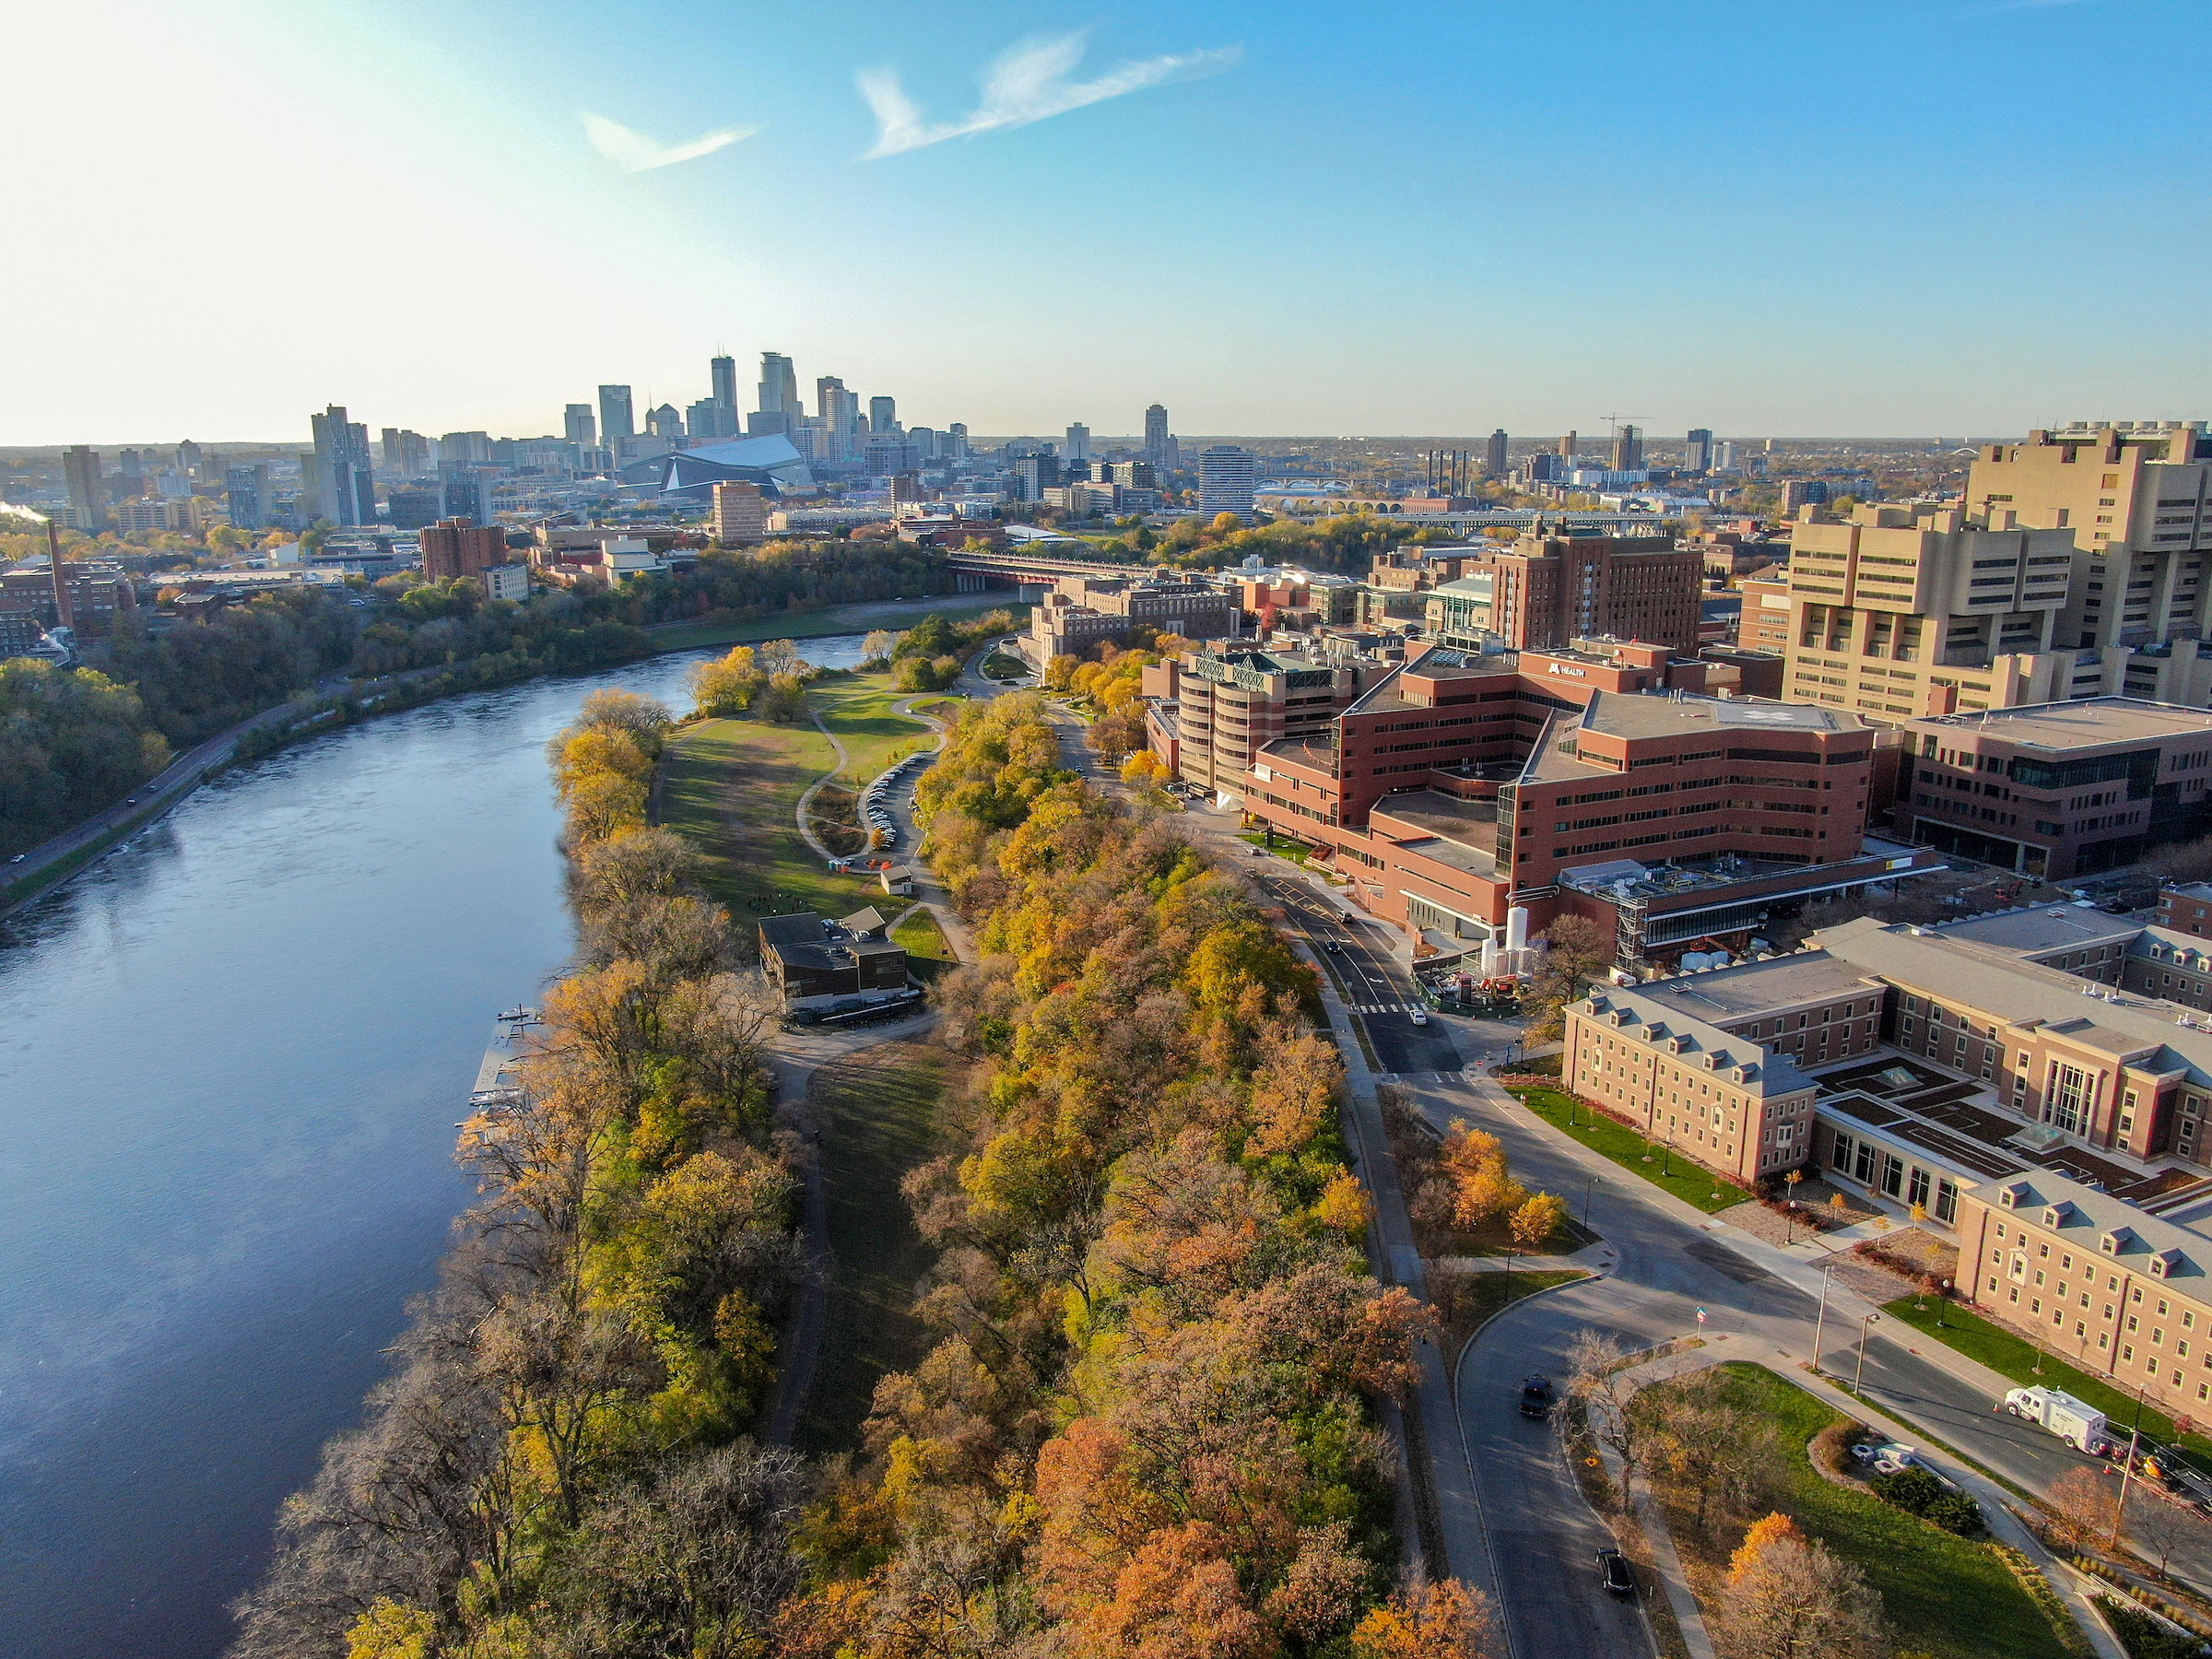 Image of East Bank and the rivers looking into downtown Minneapolis.